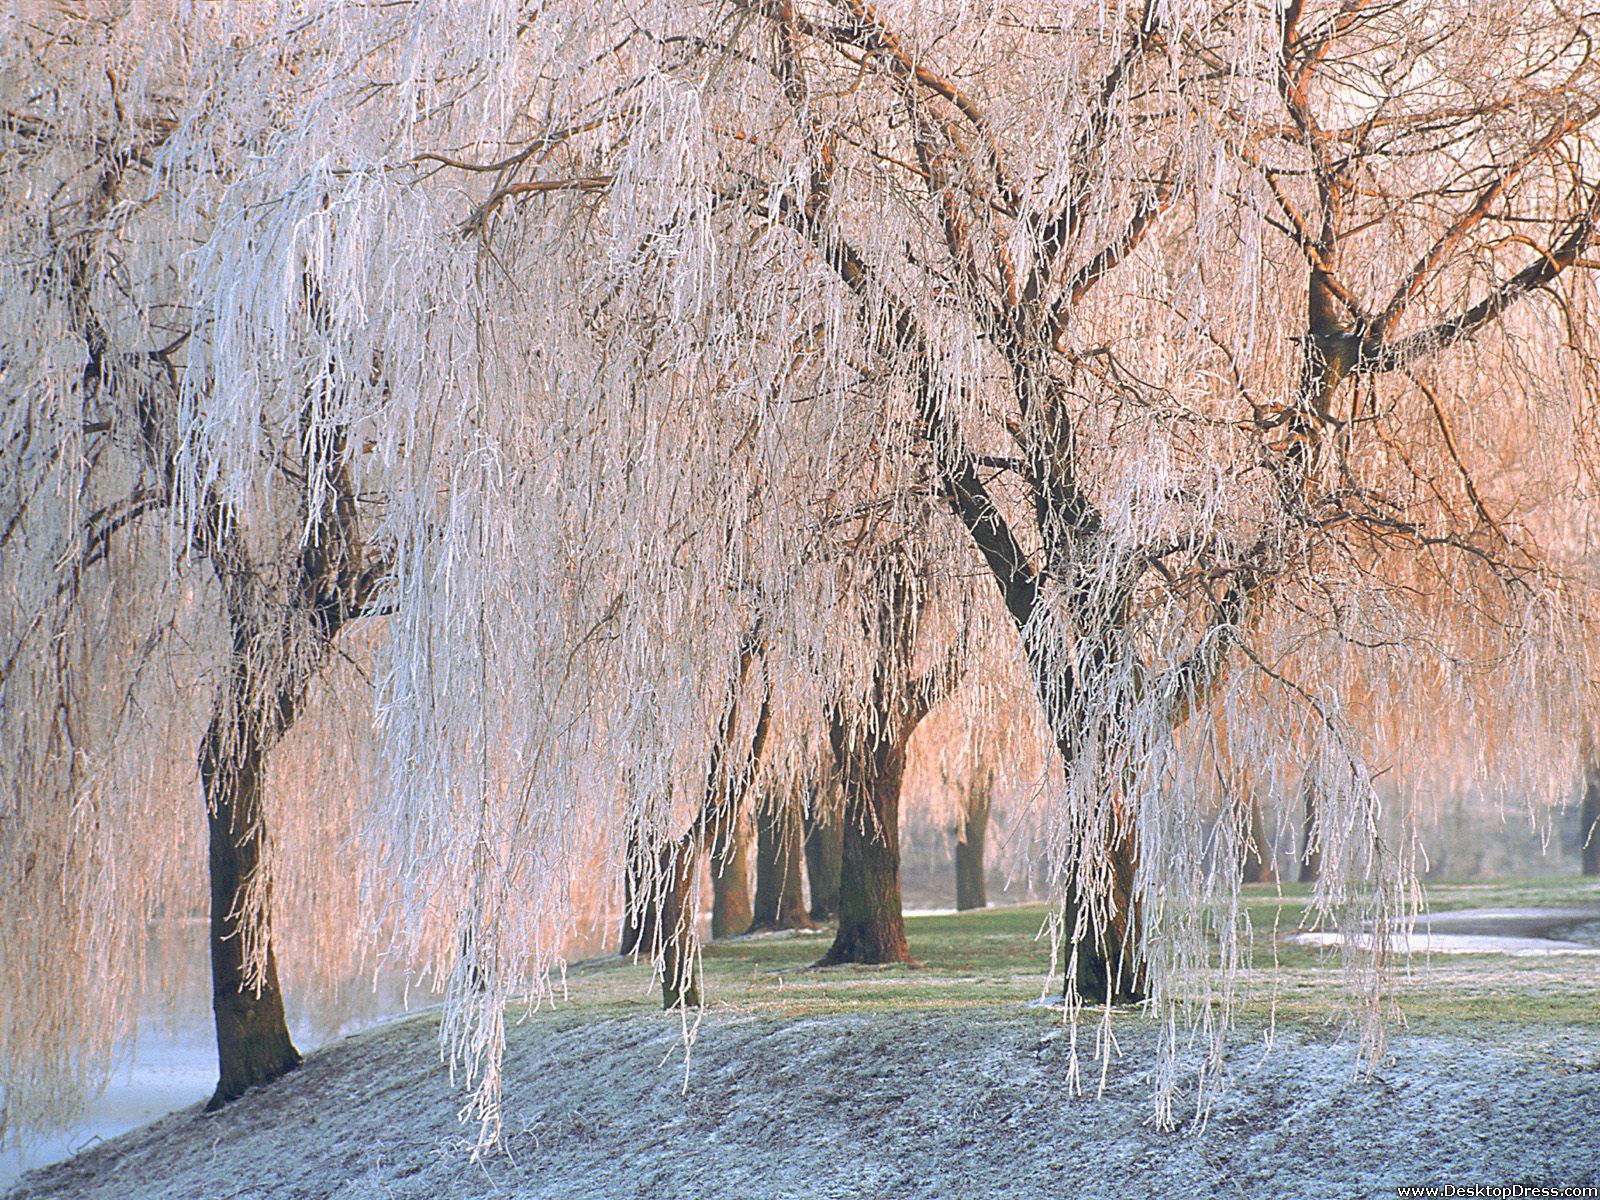 Desktop Wallpapers » Natural Backgrounds » Ice Covered Willow Trees ...